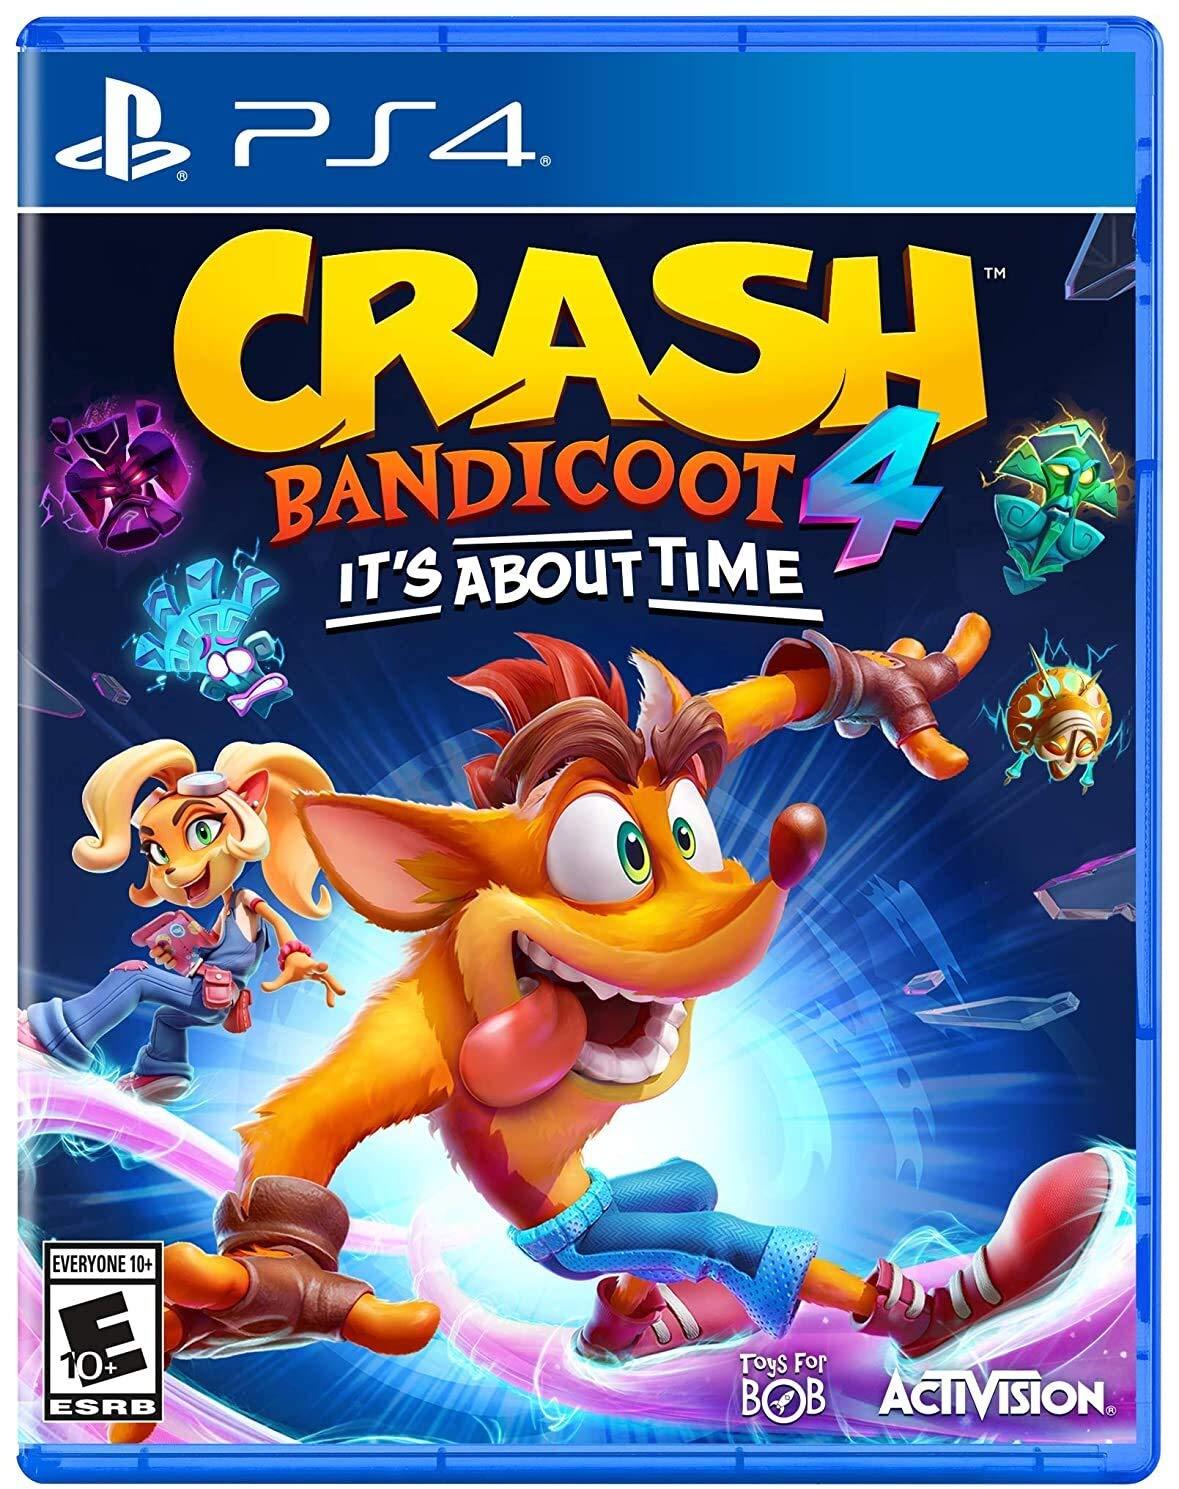 Crash Bandicoot 4 It's About Time - Sony PlayStation 4 (PS4)